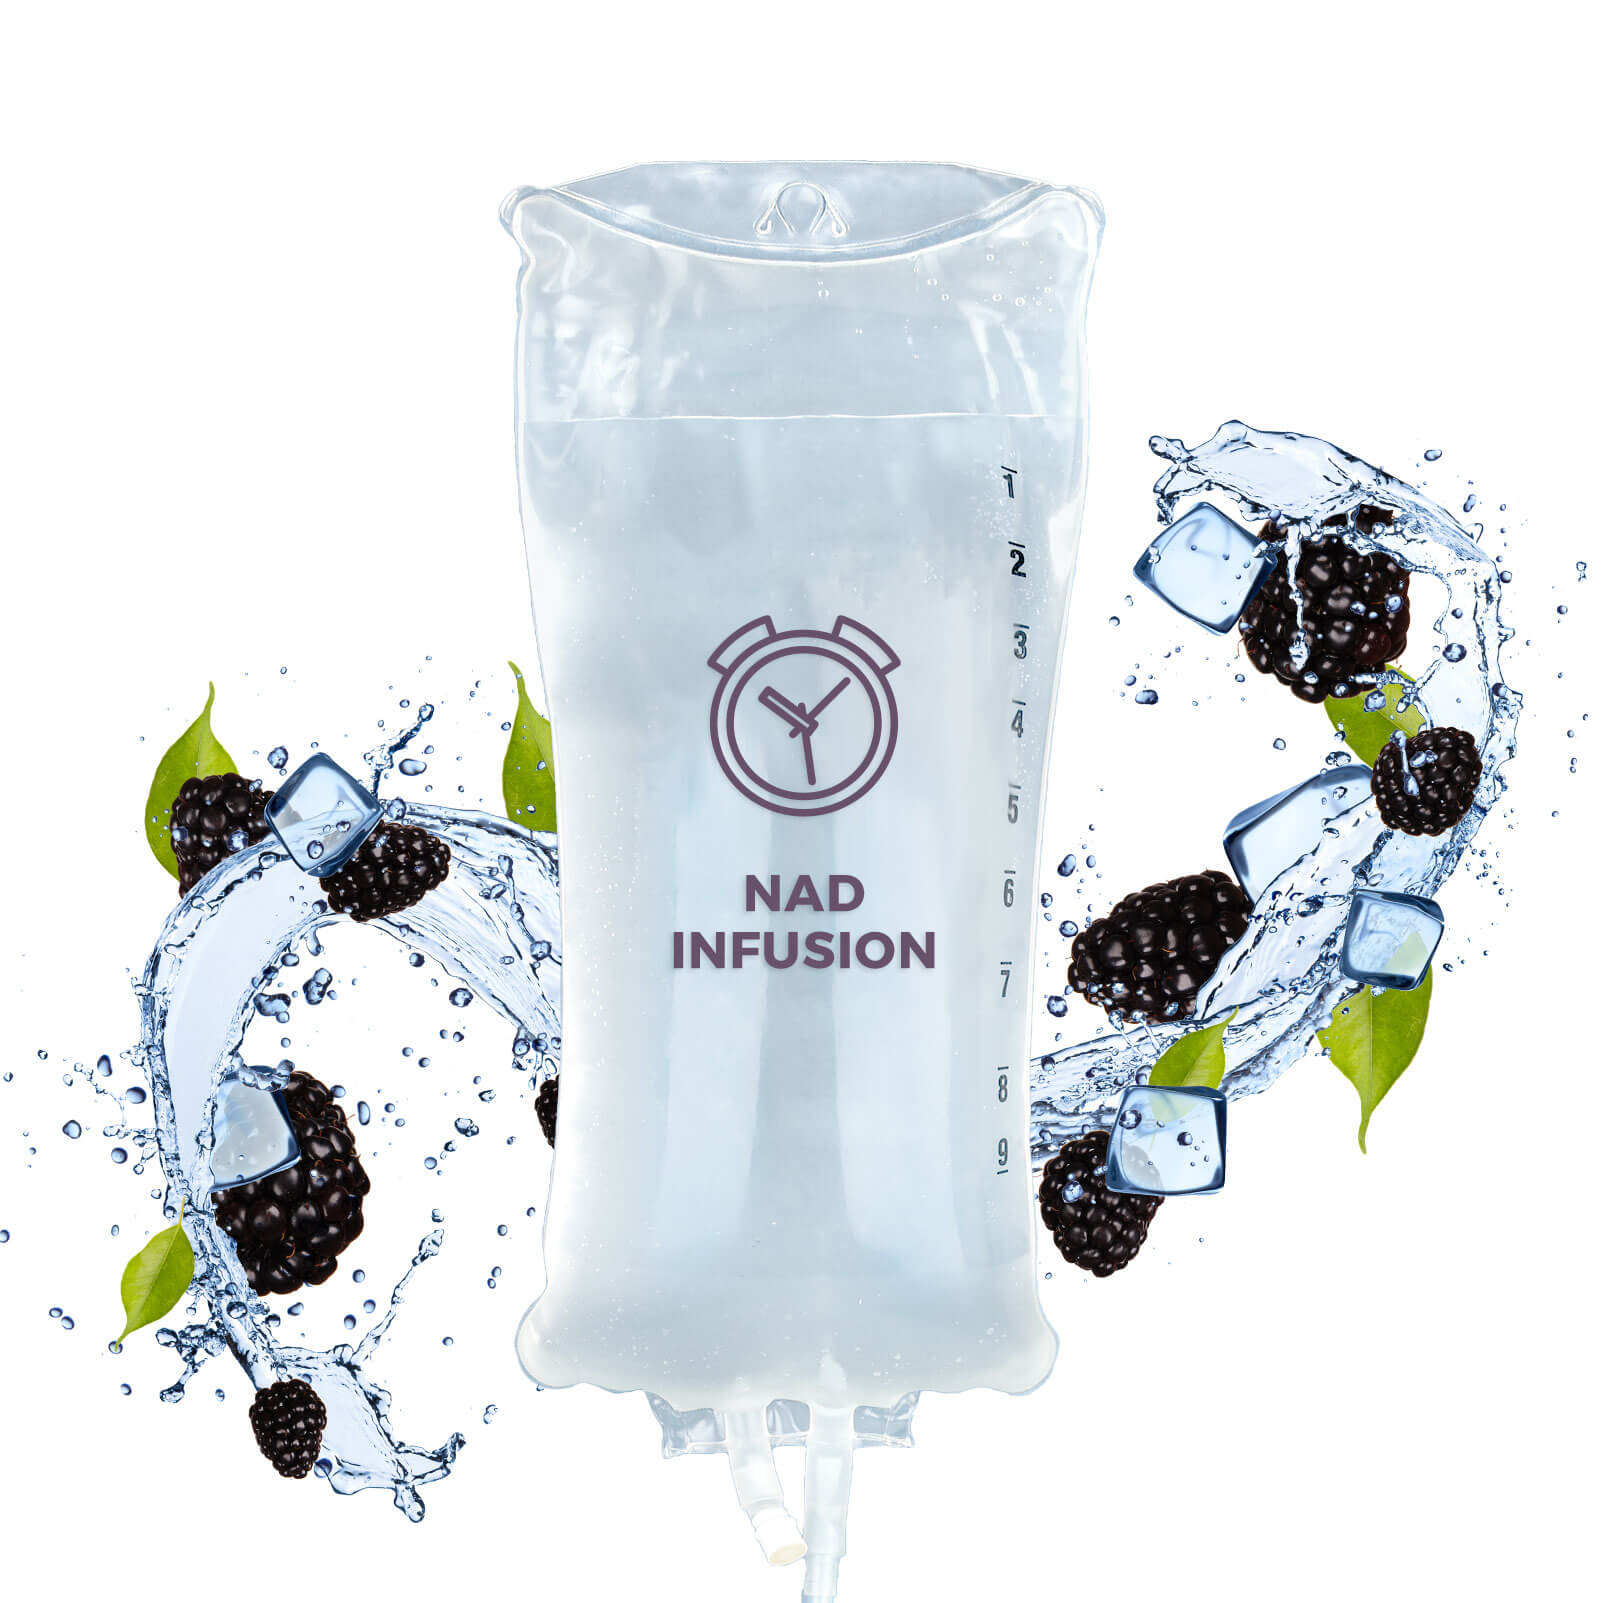 NAD Infusions - Med Spa Laccura